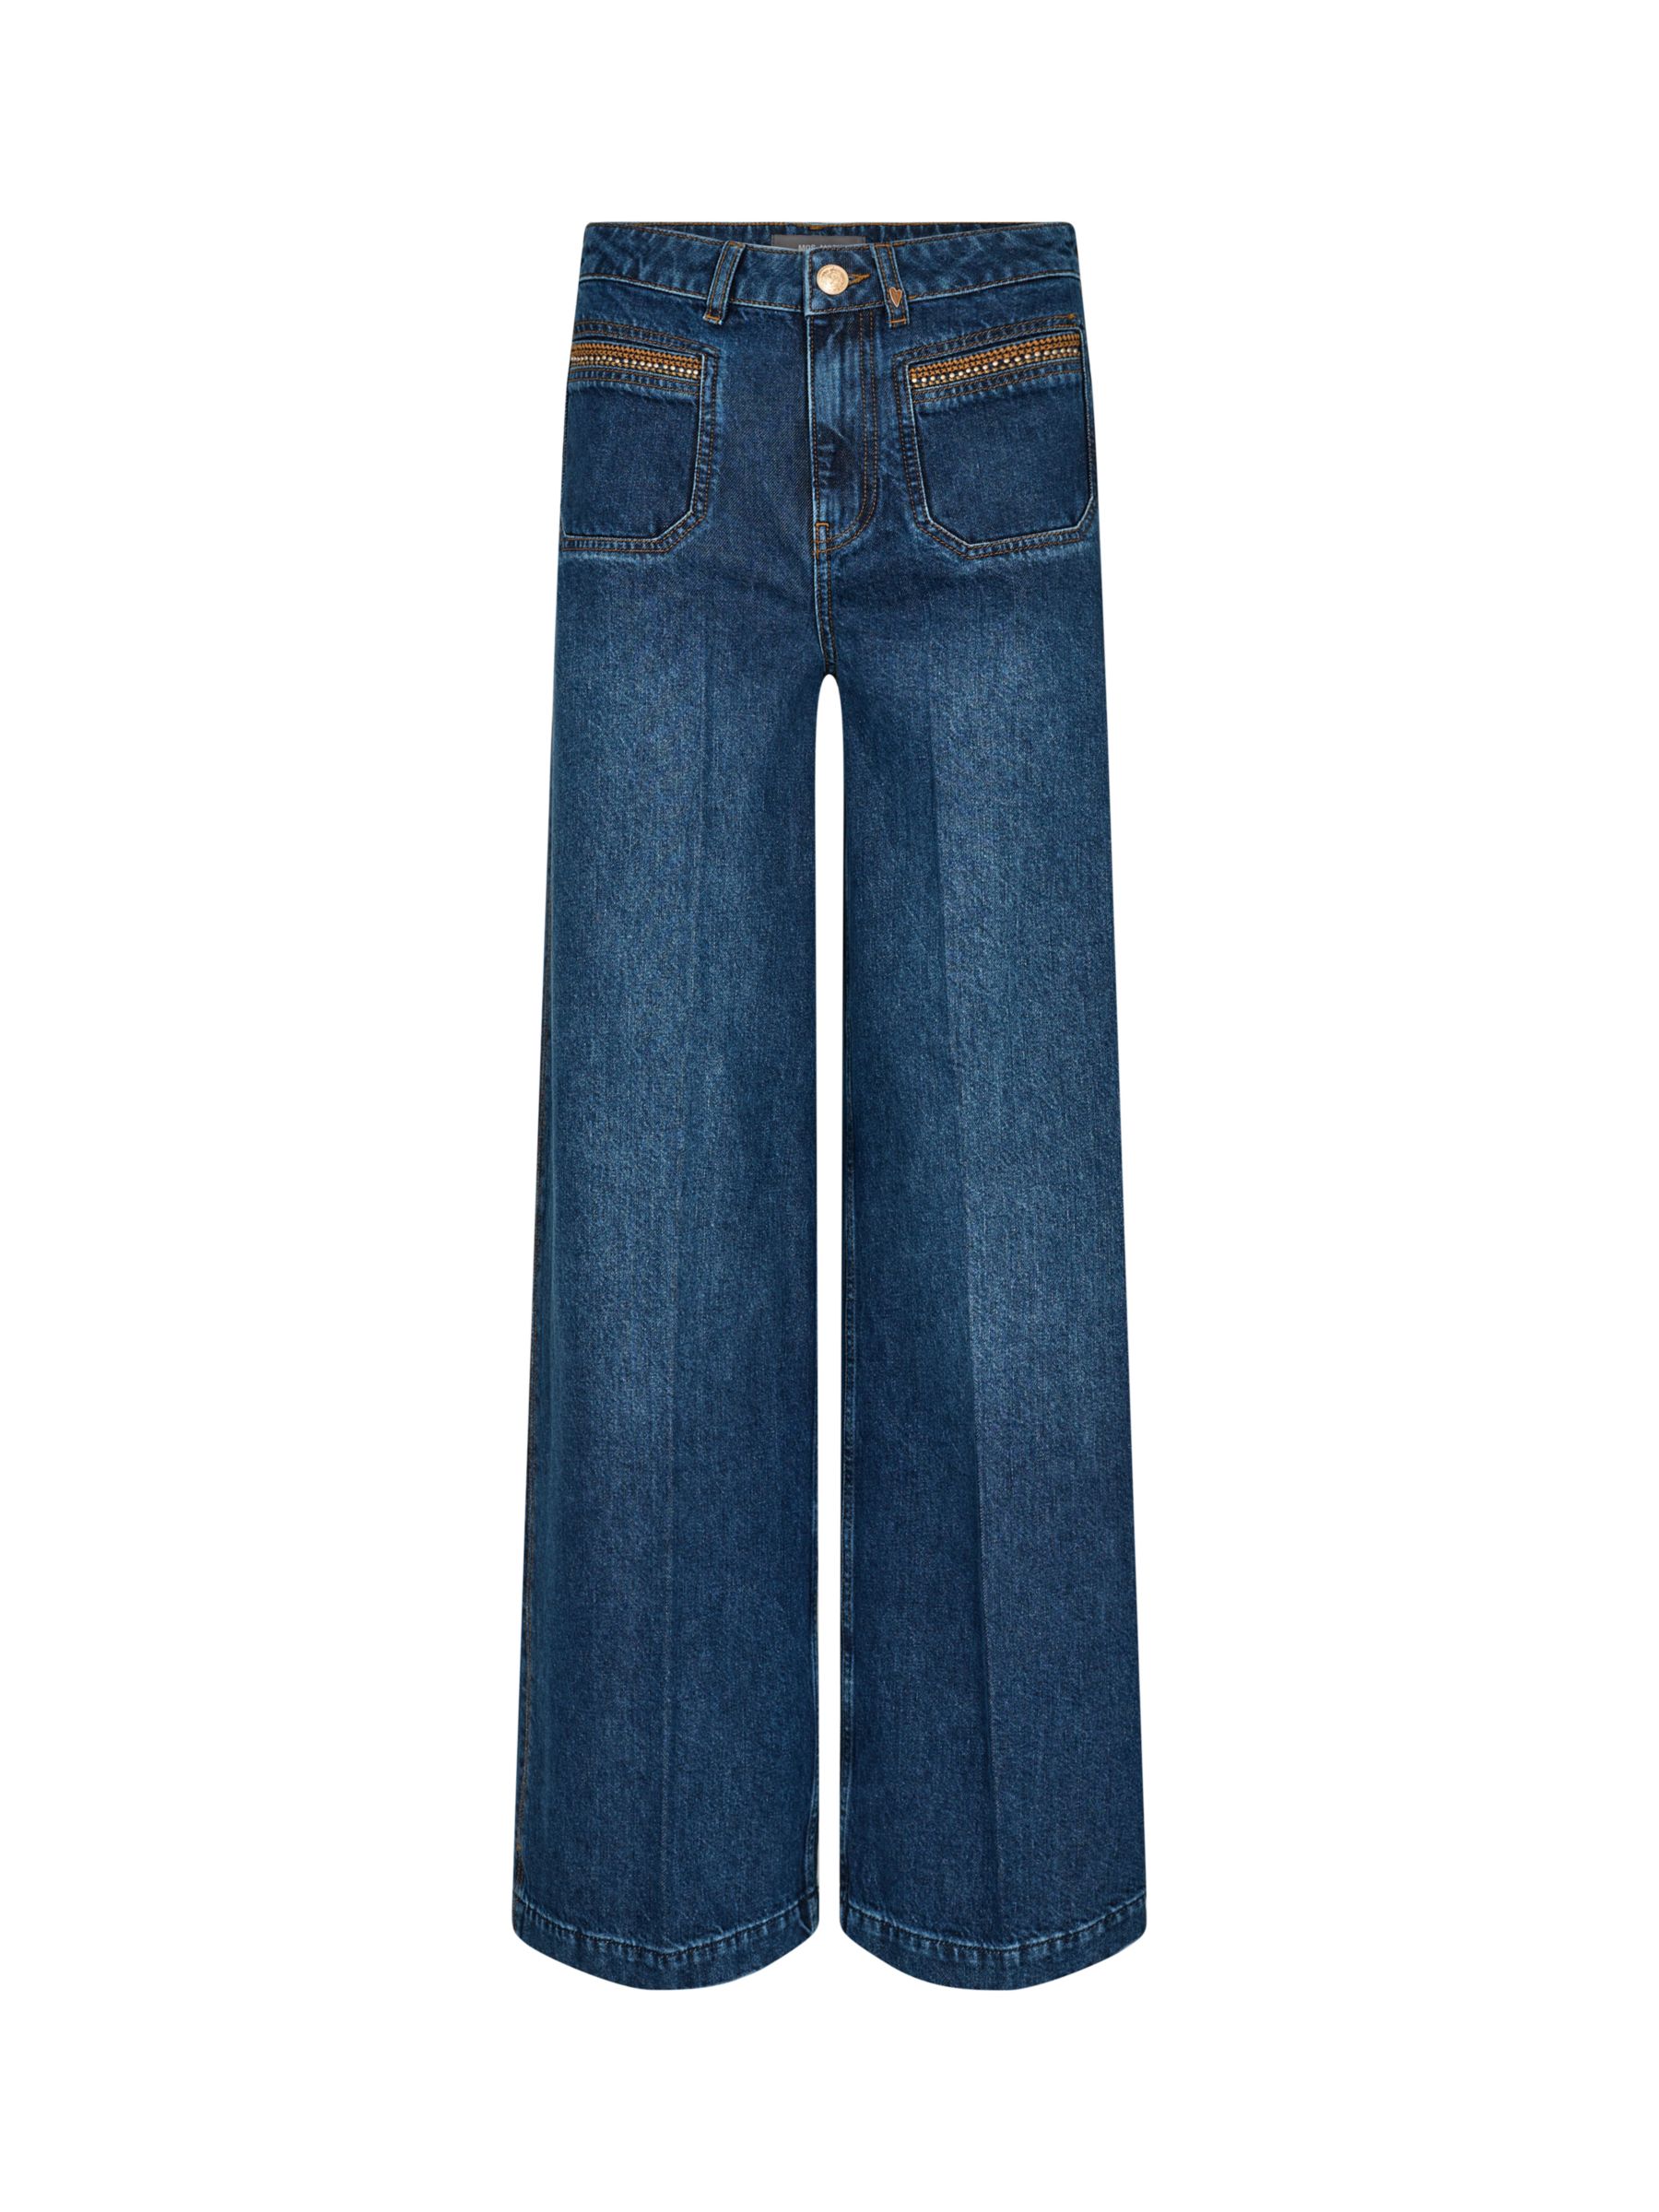 MOS MOSH Colette Sassy High Rise Jeans, Blue at John Lewis & Partners